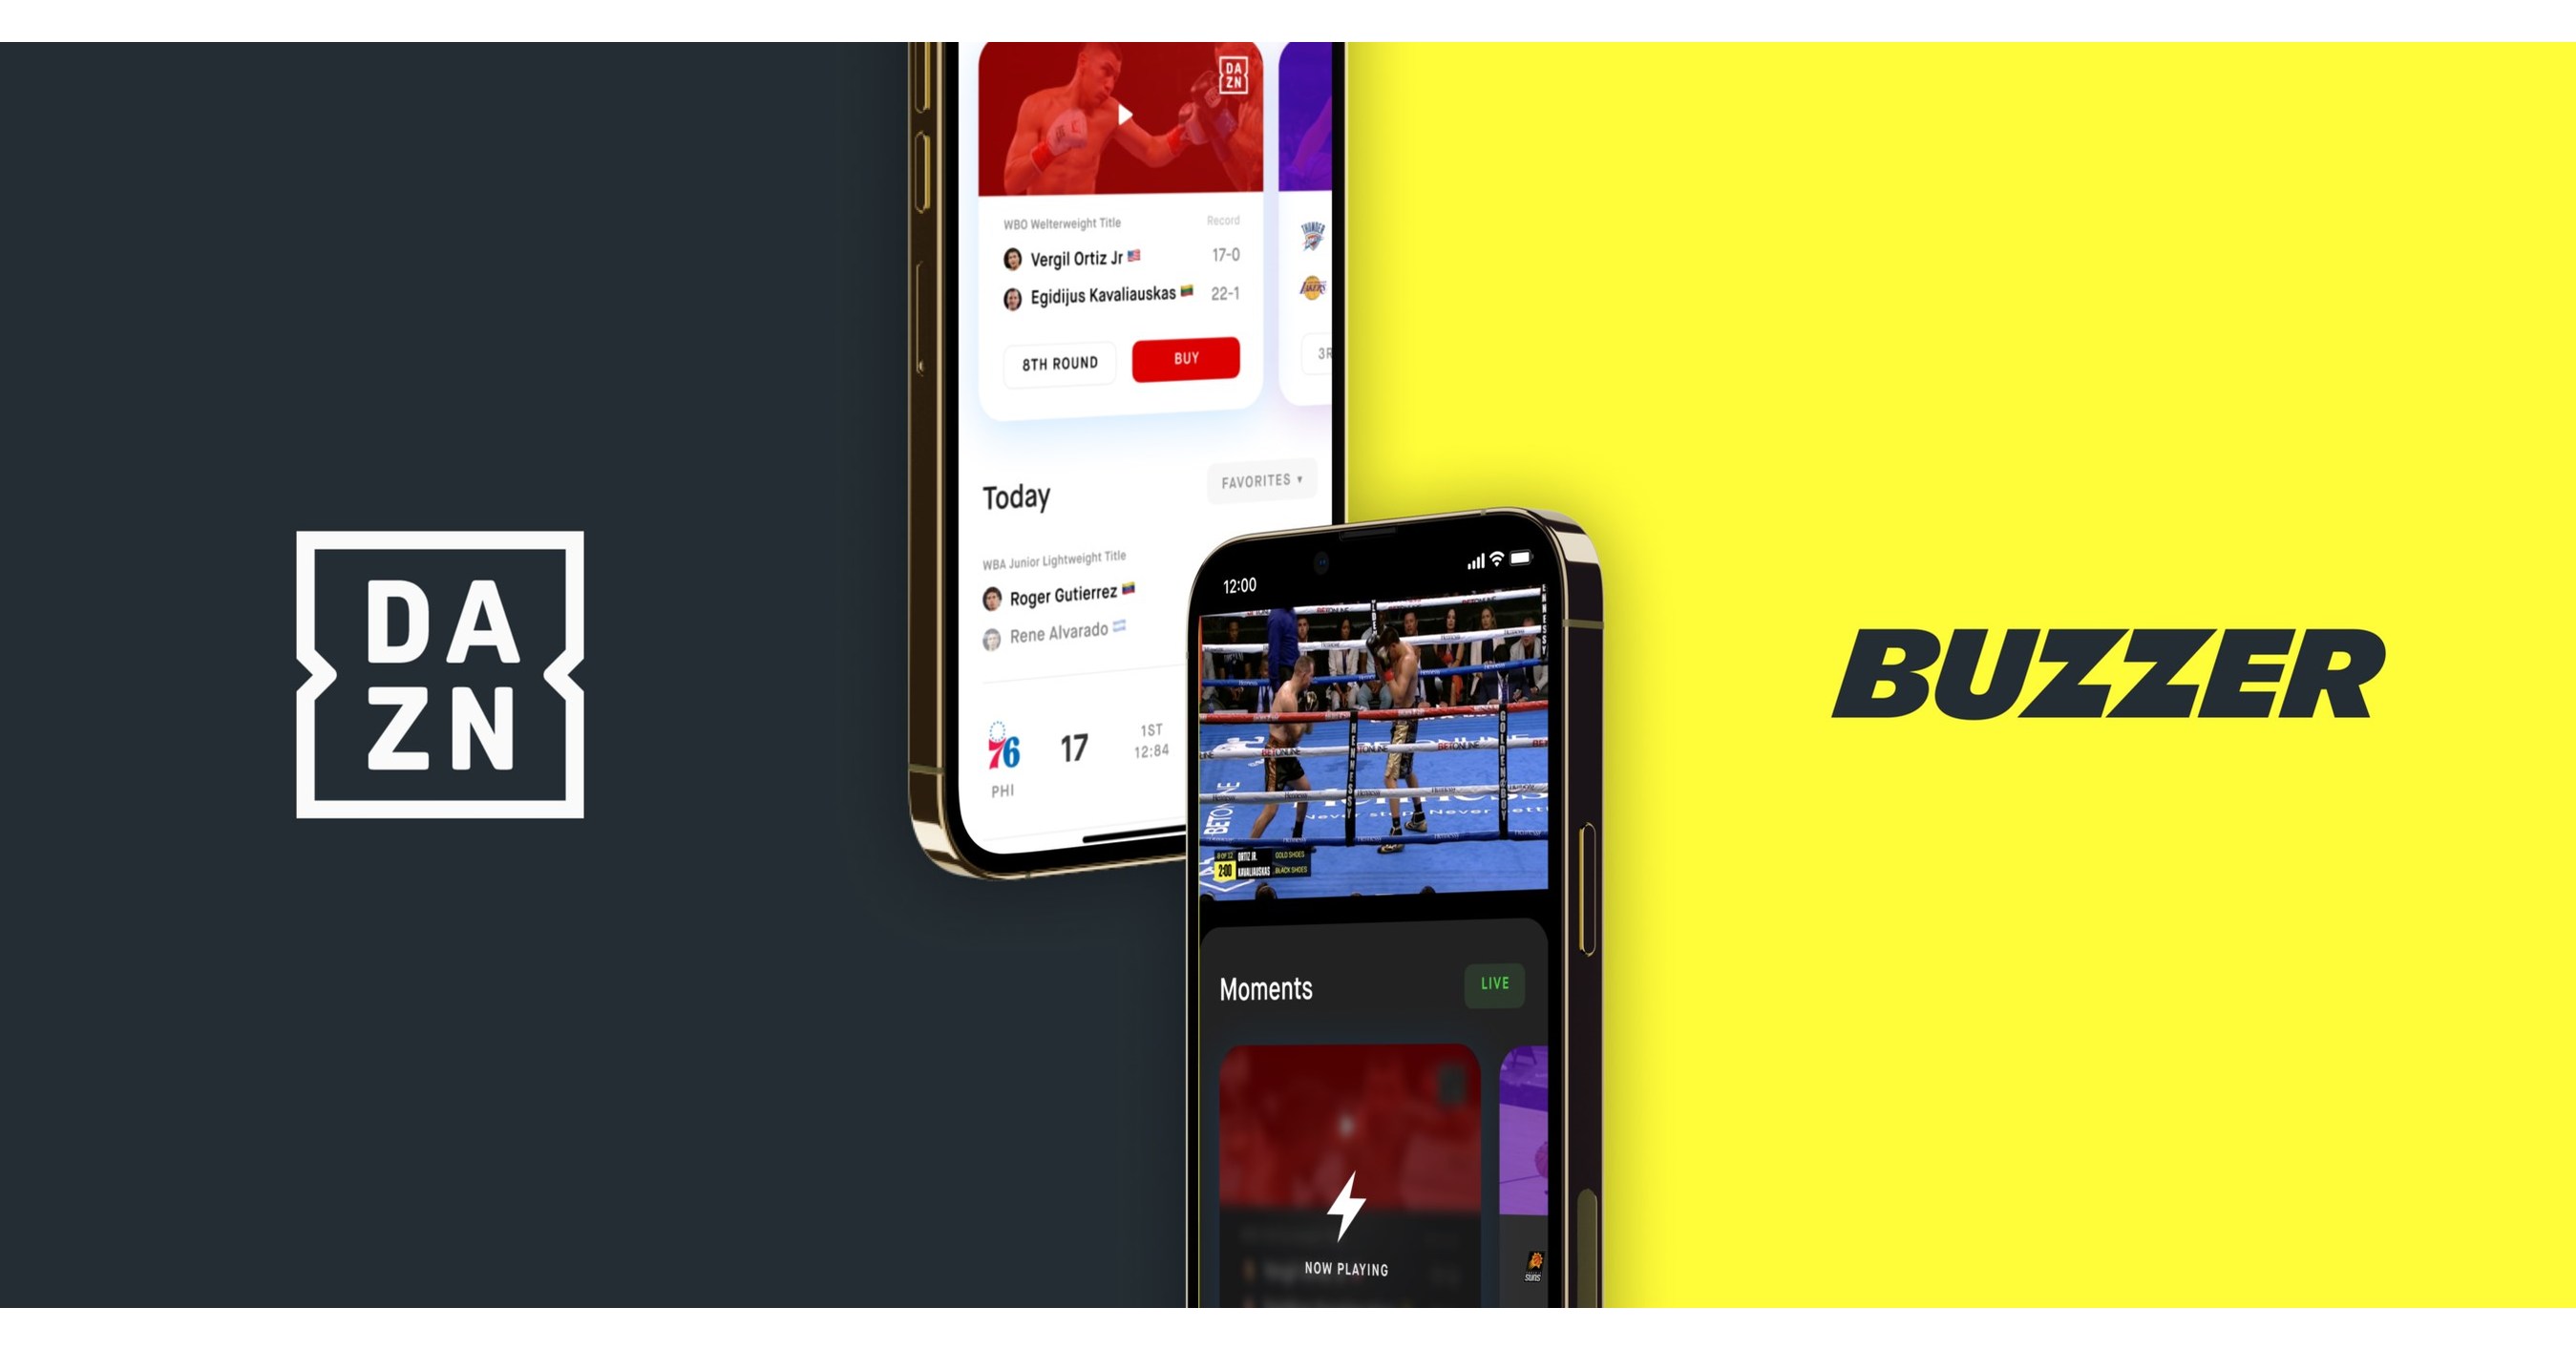 Buzzer Announces New Partnership With Dazn To Bring Live Short Form Sports Content To Mobile First Fans